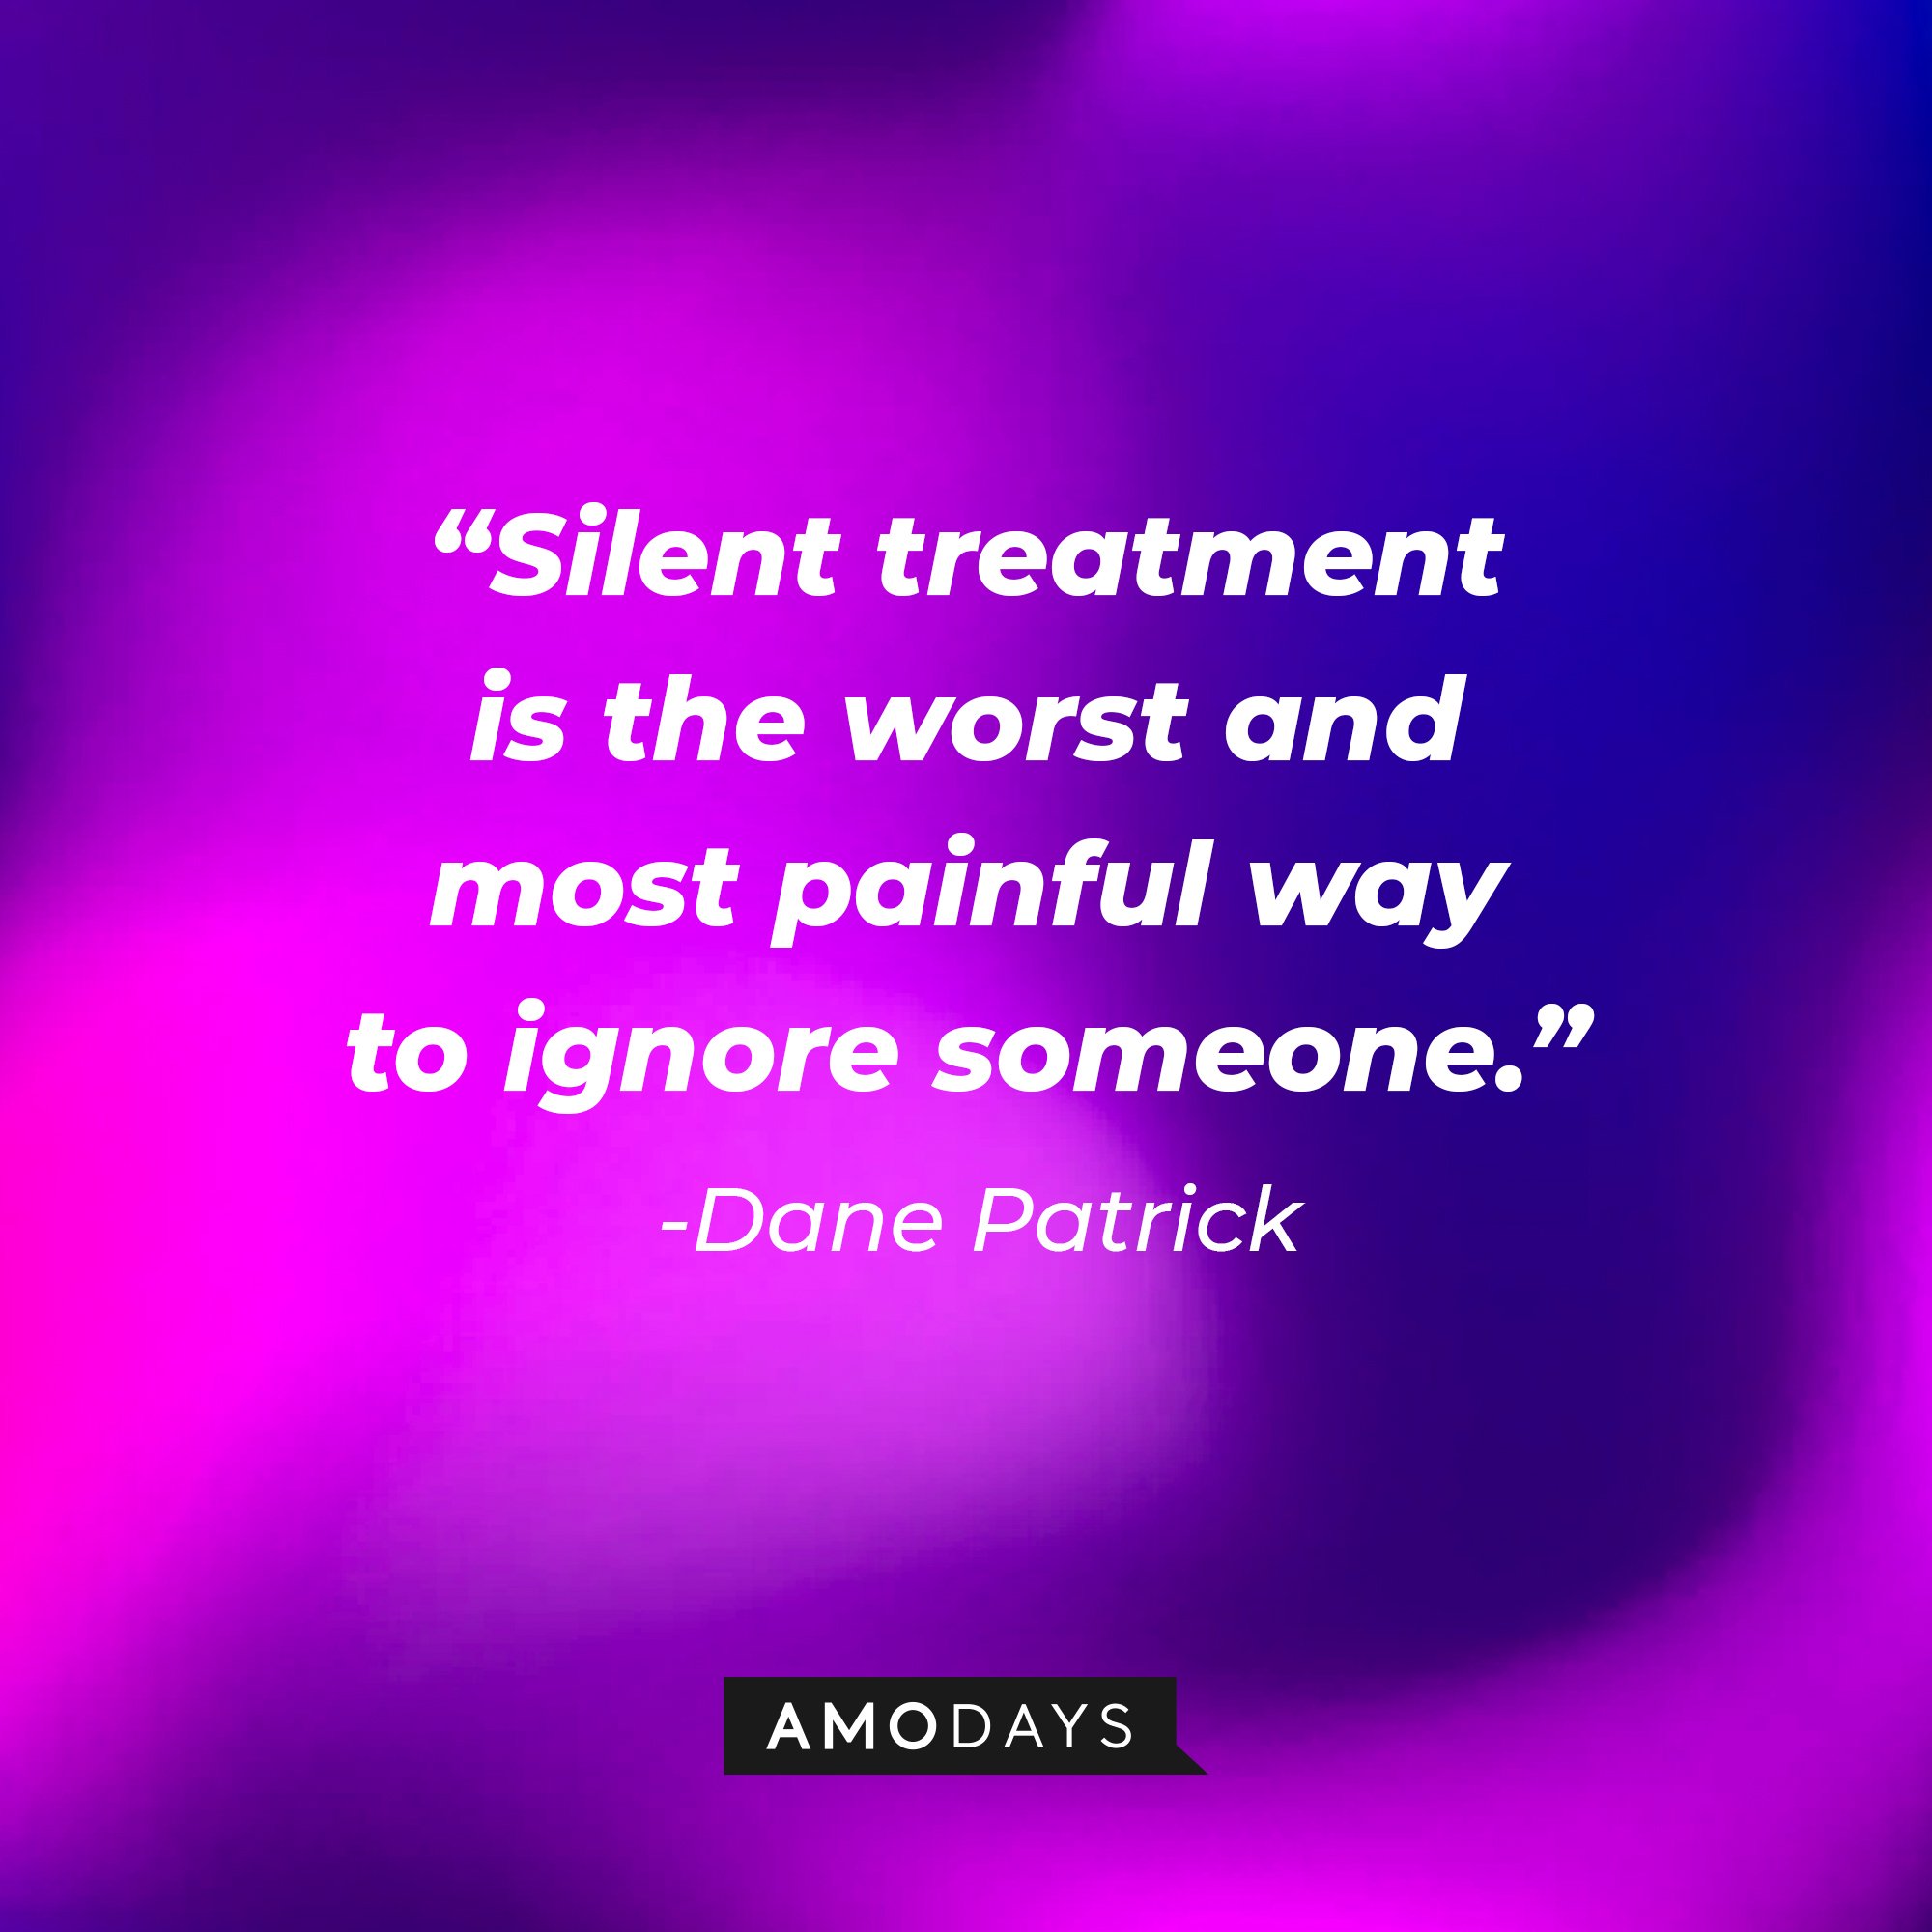 Dane Patrick's quote:\\\\u00a0"Silent treatment is the worst and most painful way to ignore someone."\\\\u00a0| Image: AmoDays